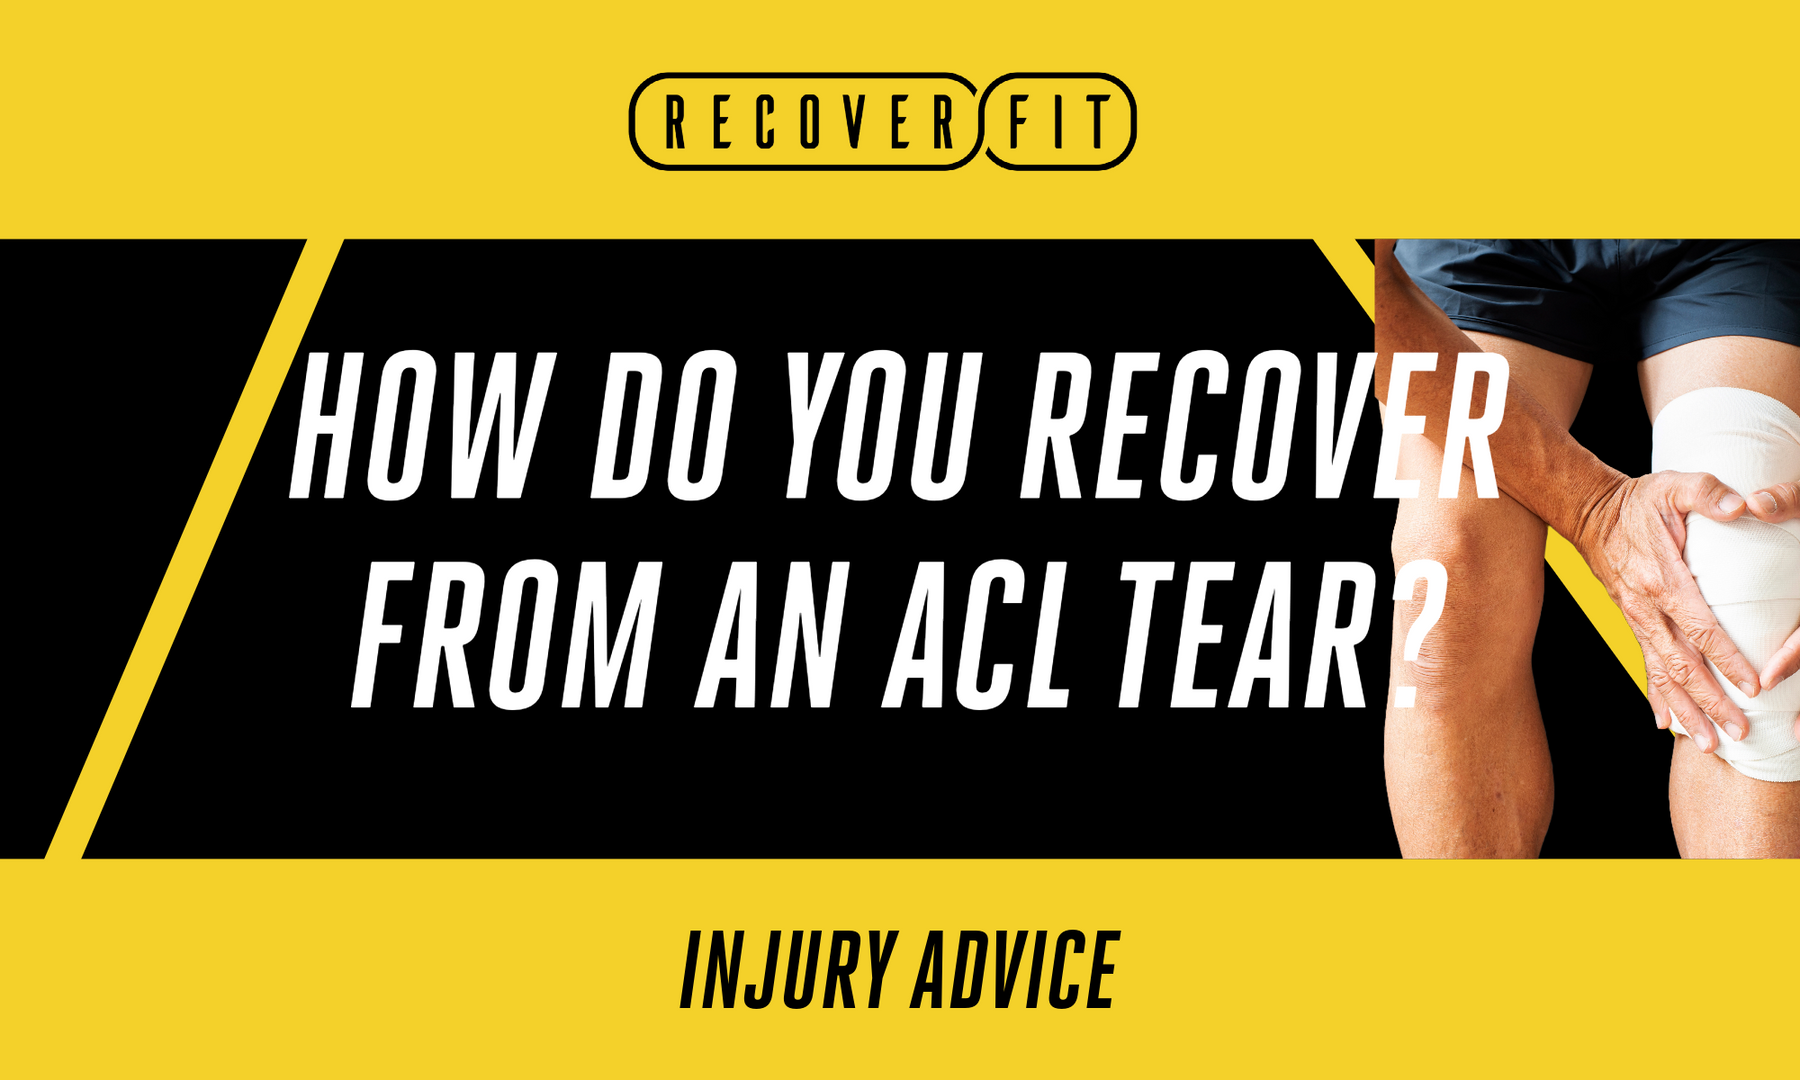 How do you recover from an ACL tear?